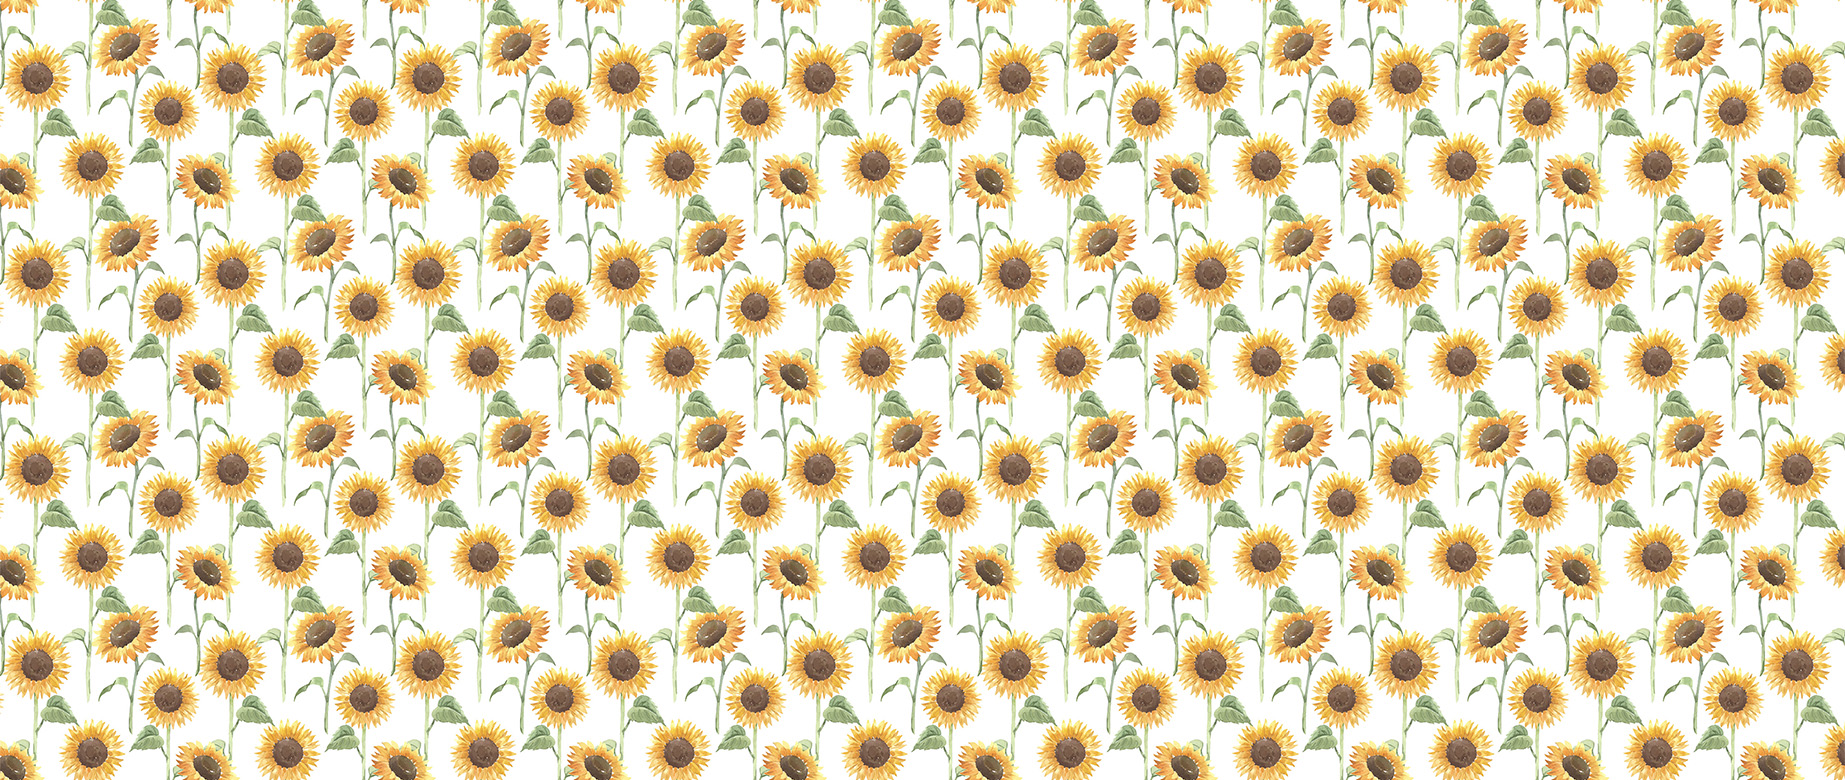 sunflower-with-leaf-in-watercolour-design-wallpapers-full-wide-view